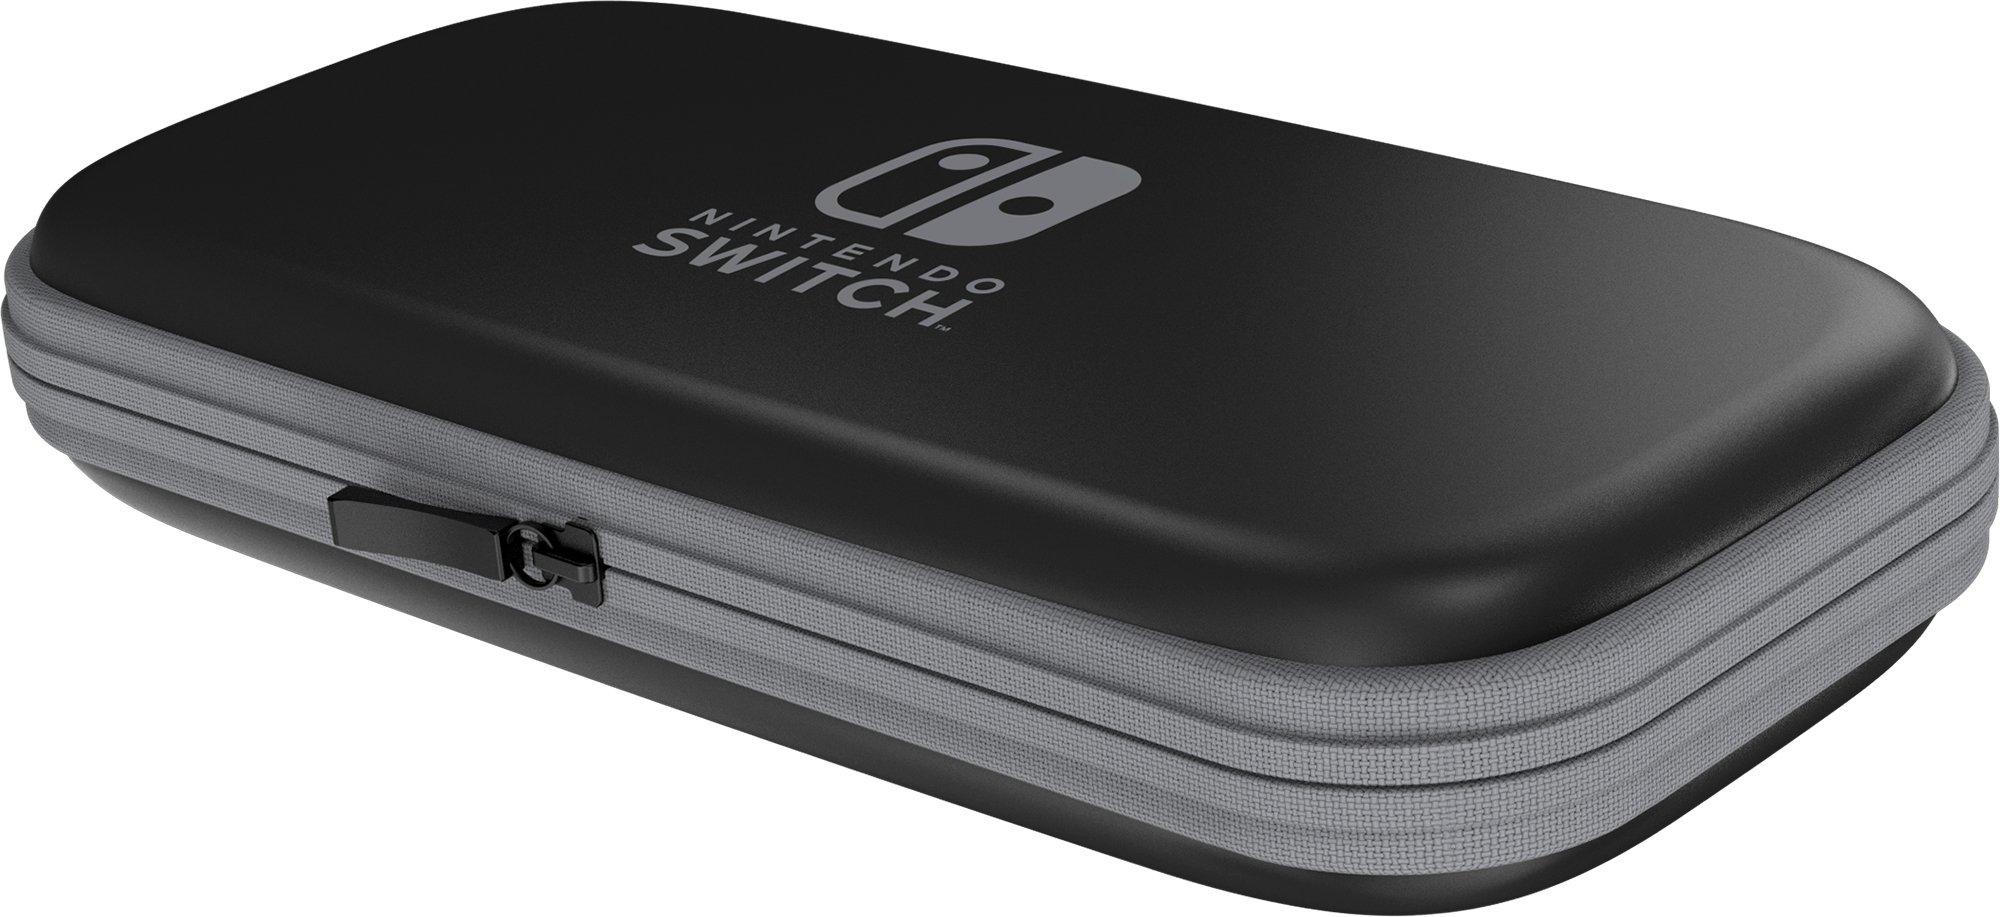 switch stealth case